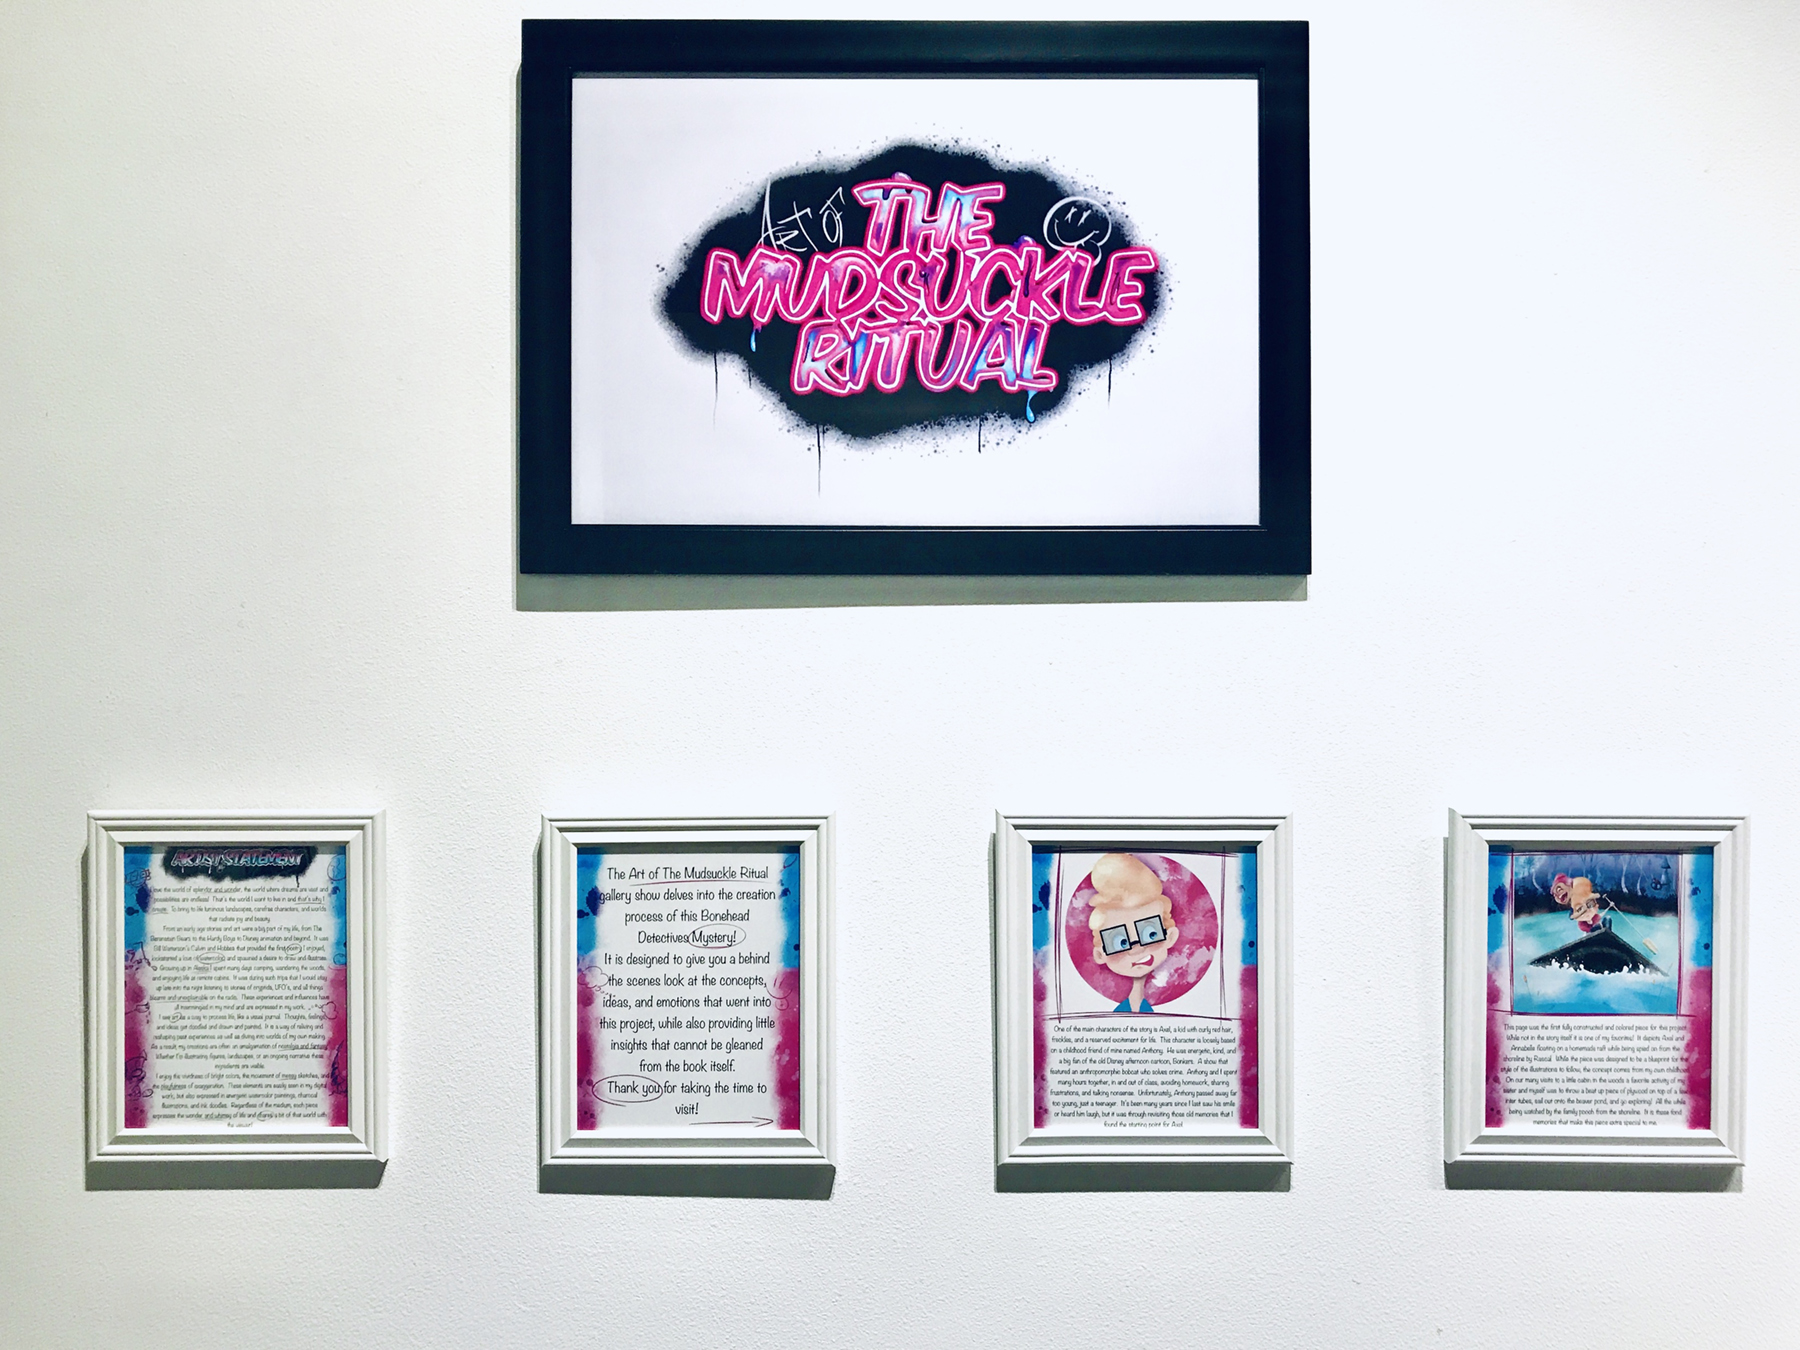 Show title and digital prints hang on the wall during David Glover's thesis show, Art of the Mudsuckle Ritual, image courtesy of the artist